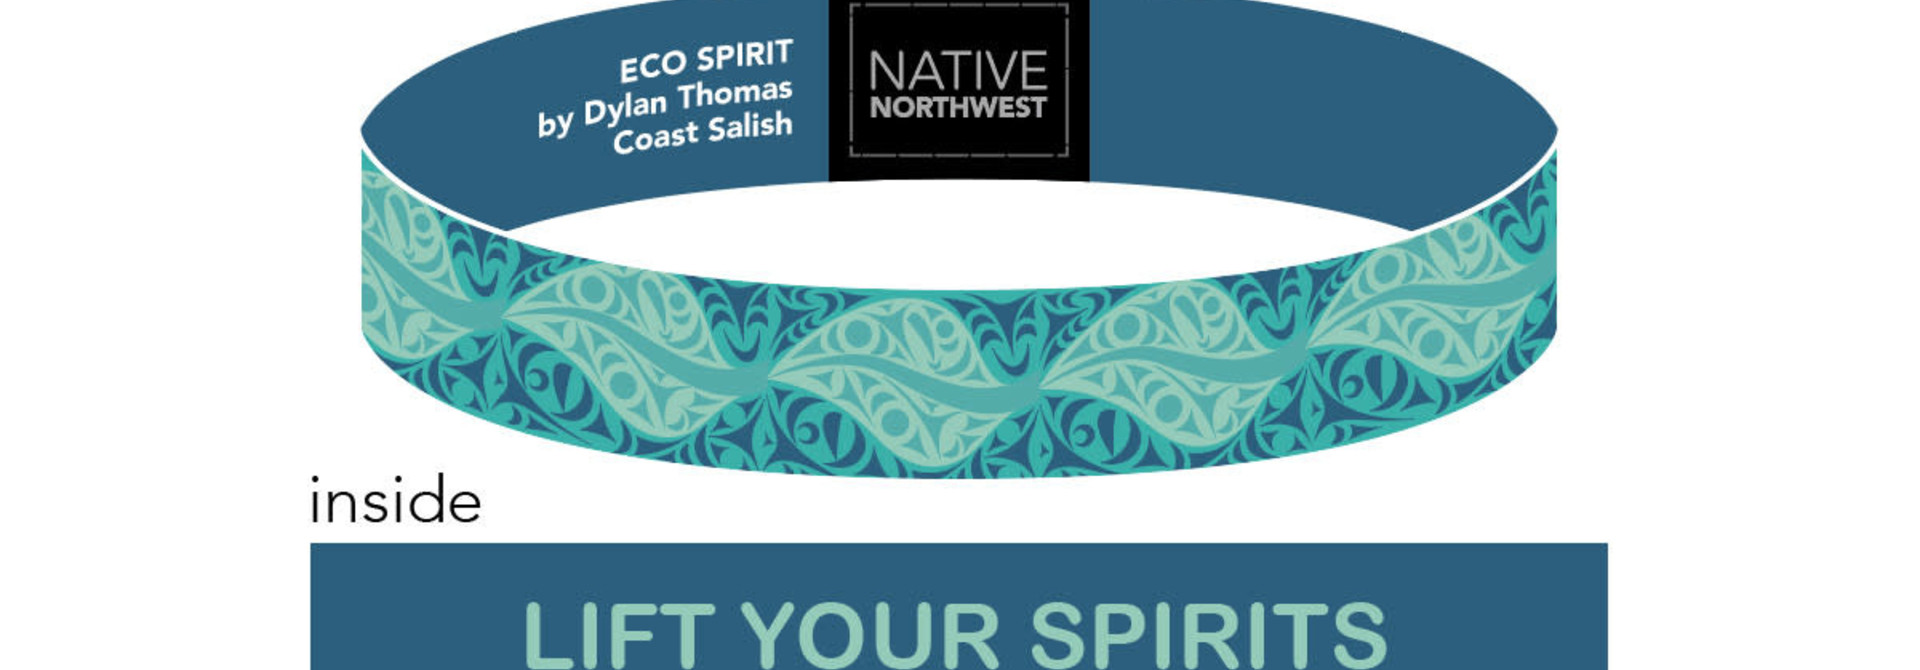 Inspirational Wristbands .5" - Lift your Spirit  by Dylan Thomas